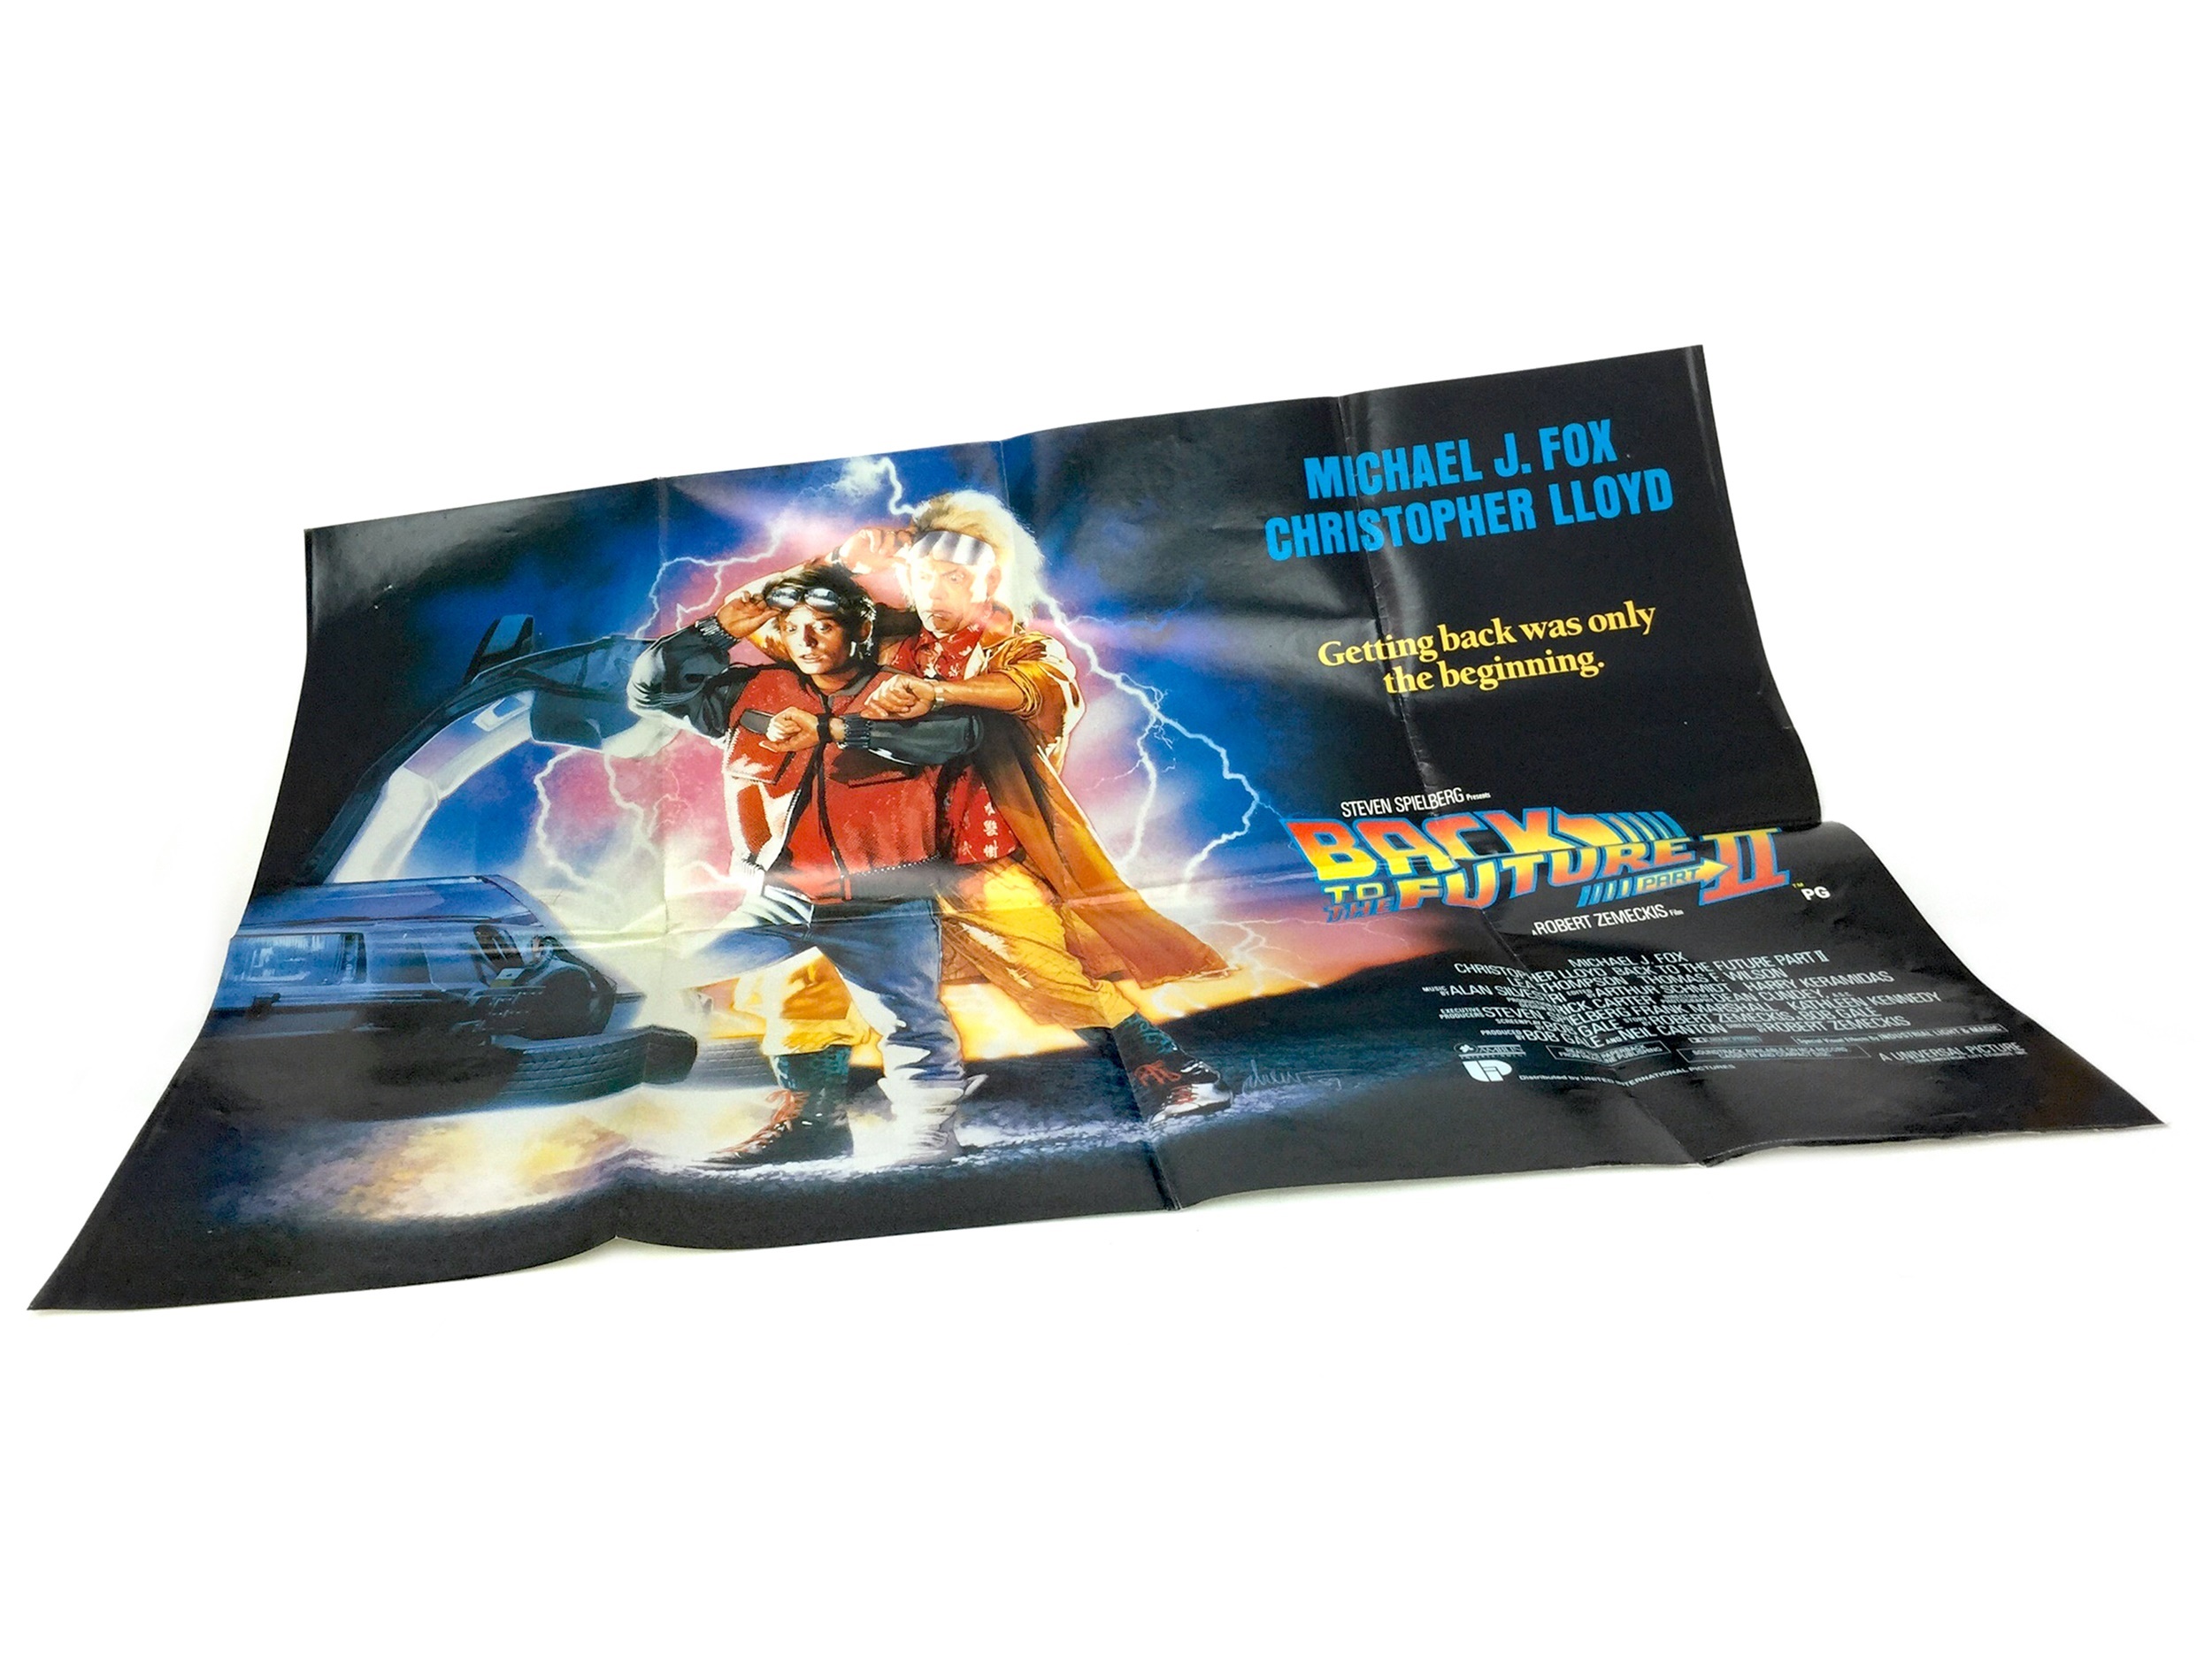 A BACK TO THE FUTURE II QUAD FILM POSTER - Image 2 of 2